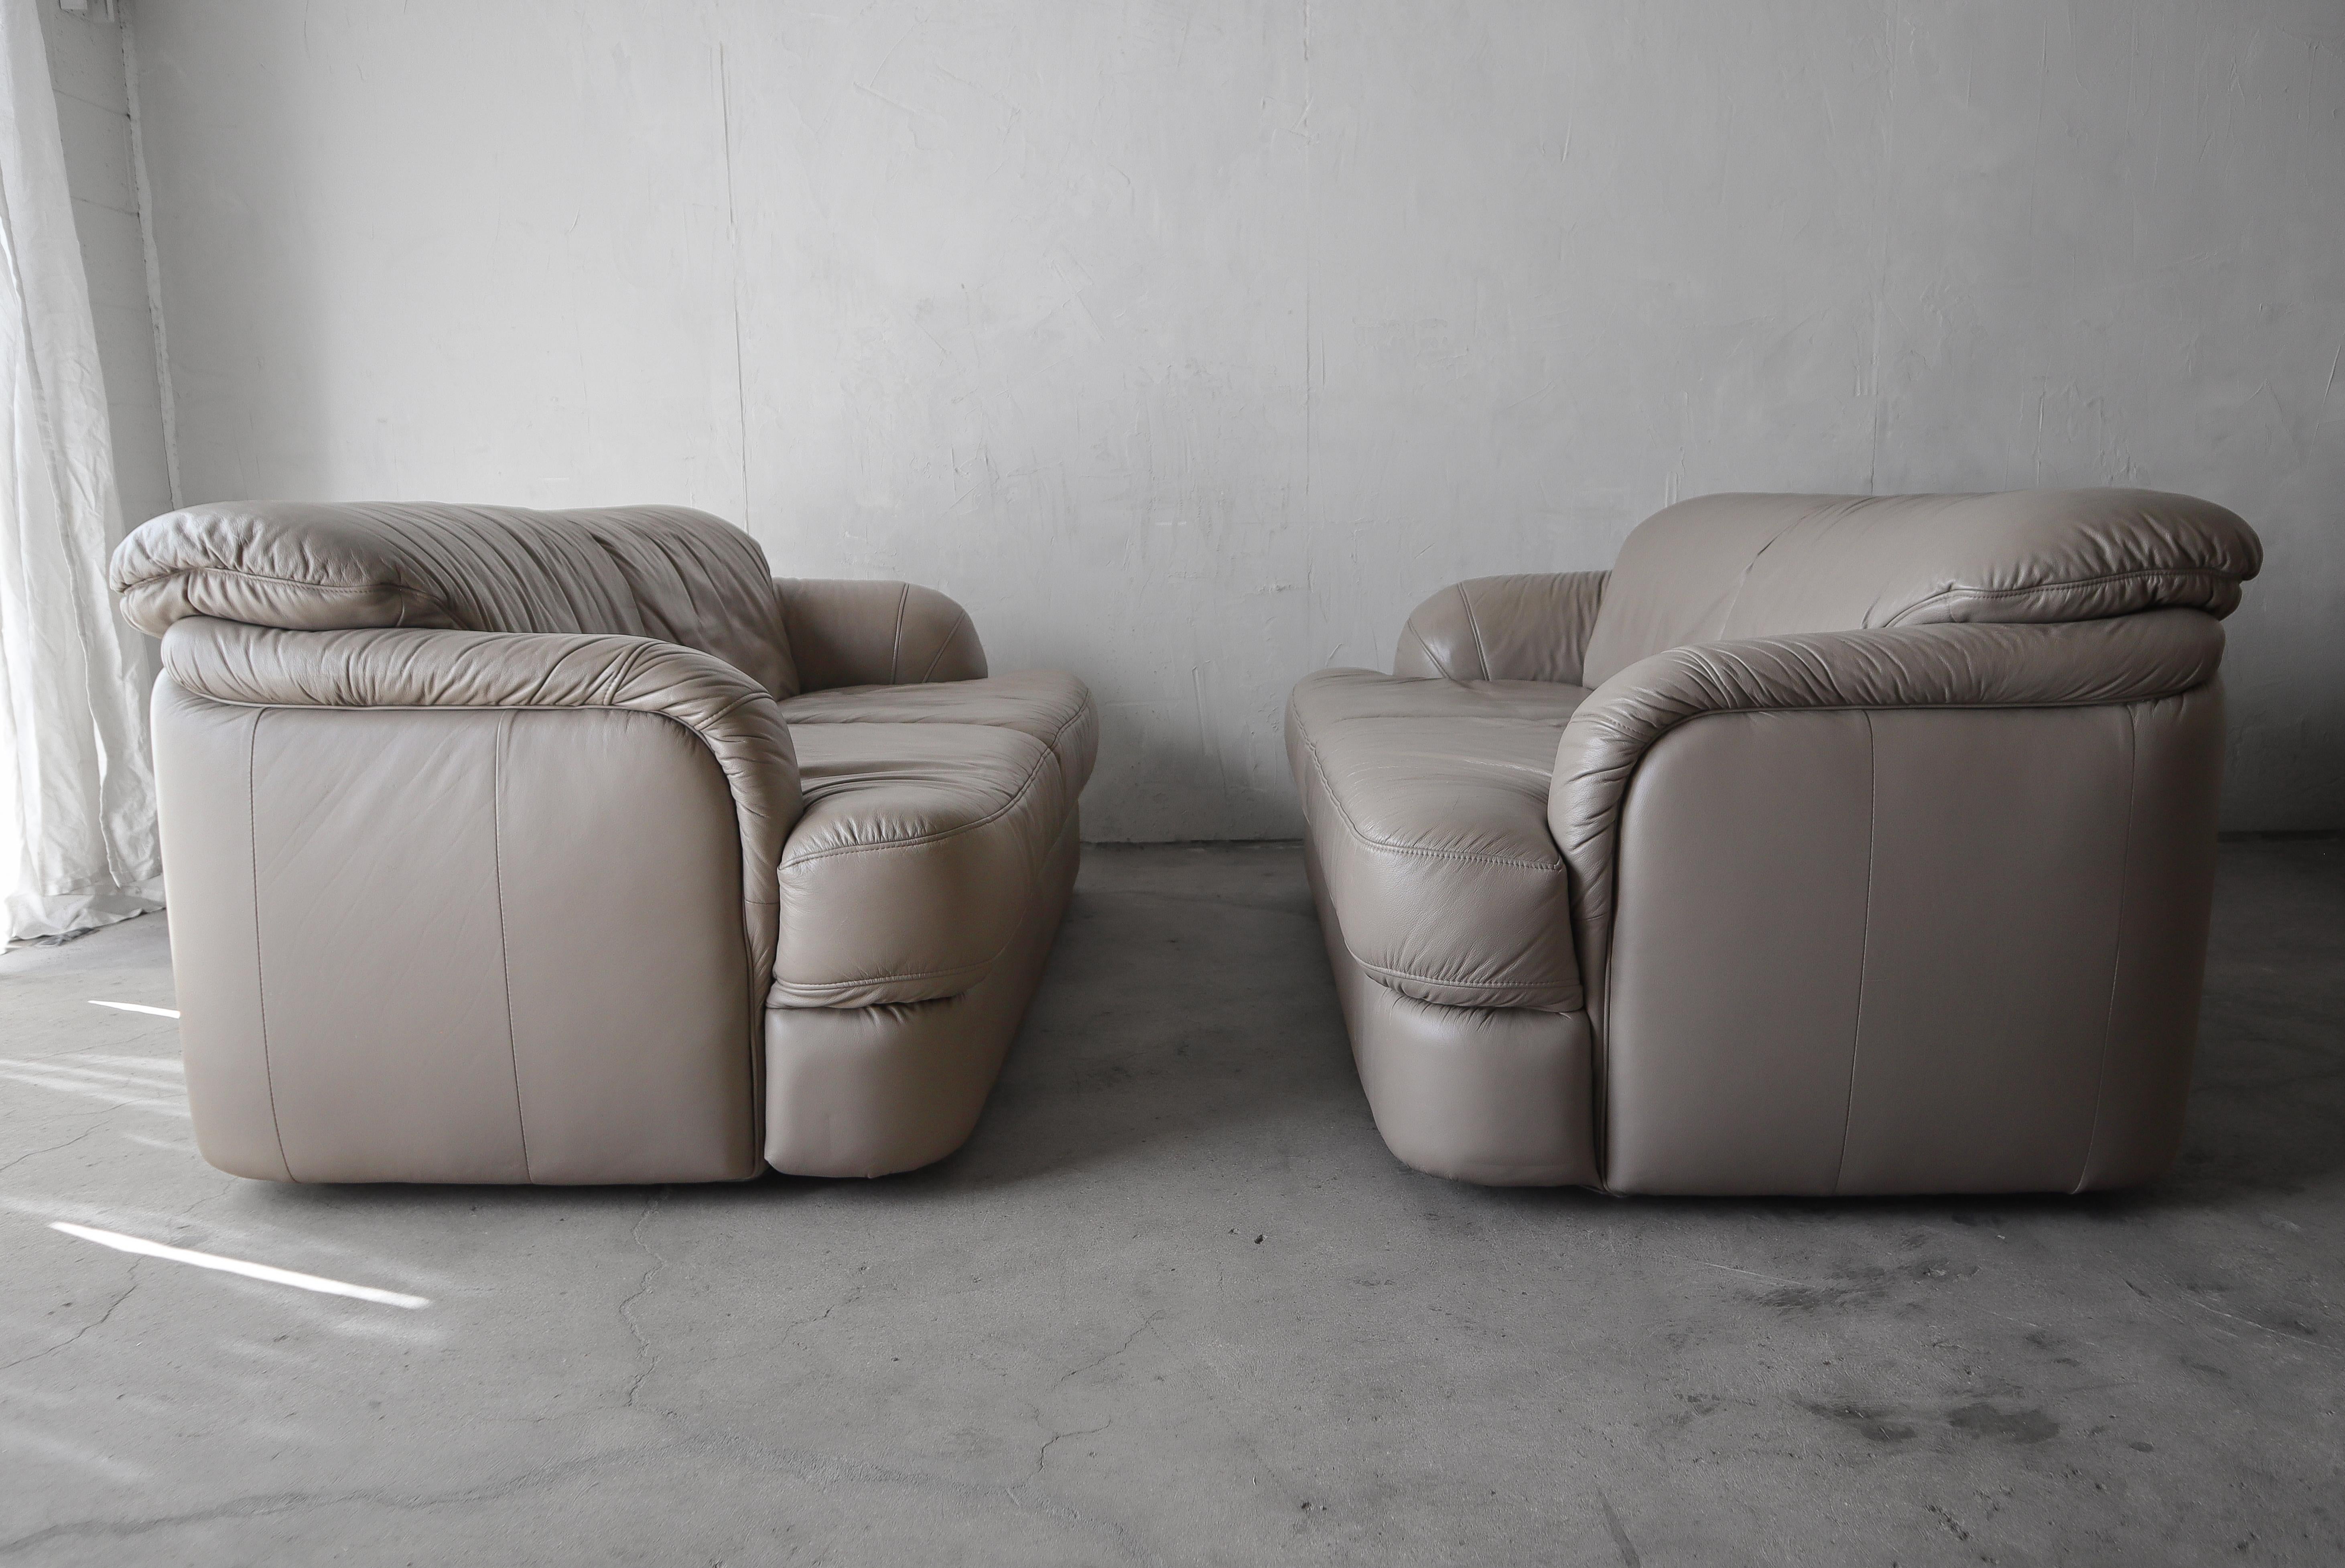 Nice pair of Post Modern Leather Loveseats made in Germany.  

Sofas are in overall good condition.  There is some wear to the leather as seen in the last few photos, but they are free of an real damage, stains or odors.

**Color is a taupe that